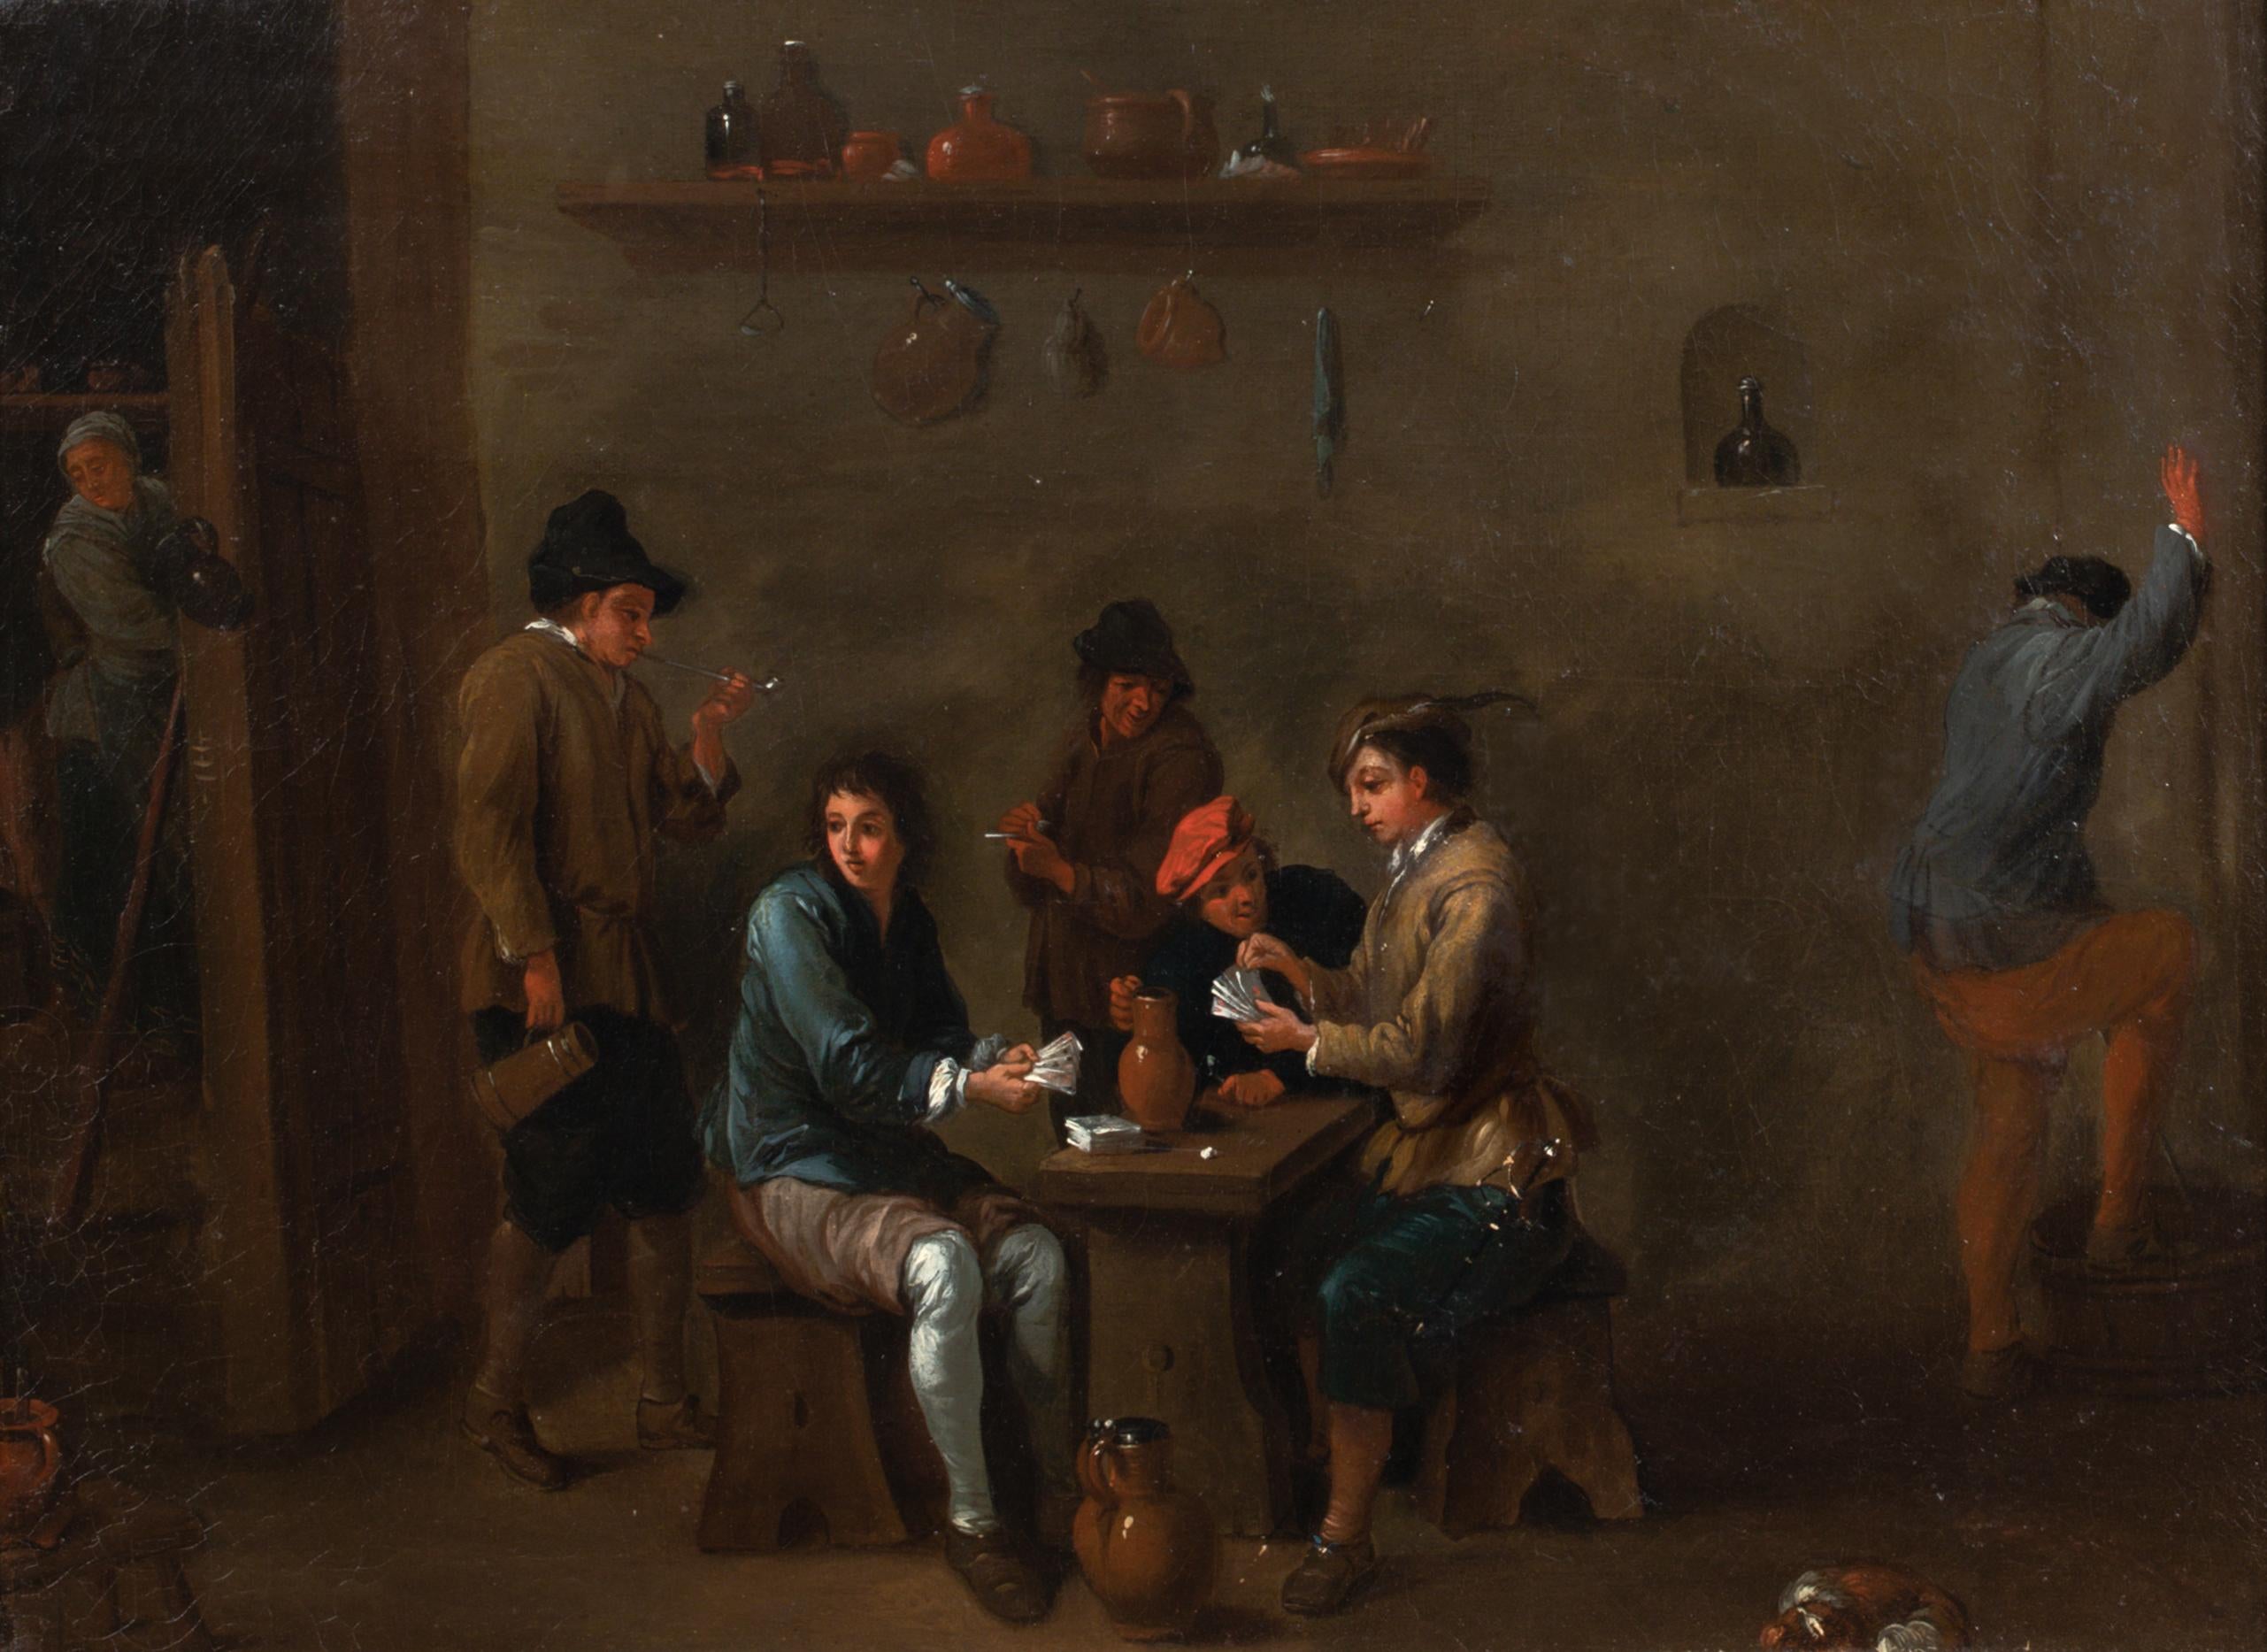 The Card Game, 17th Century

inscribed David TENIERS (1610-1690)

Large 17th Century Dutch Old Master interior tavern scene of peasants drinking, gambling, cheating, smoking and urinating, oil on canvas. Excellent quality and condition, presented in